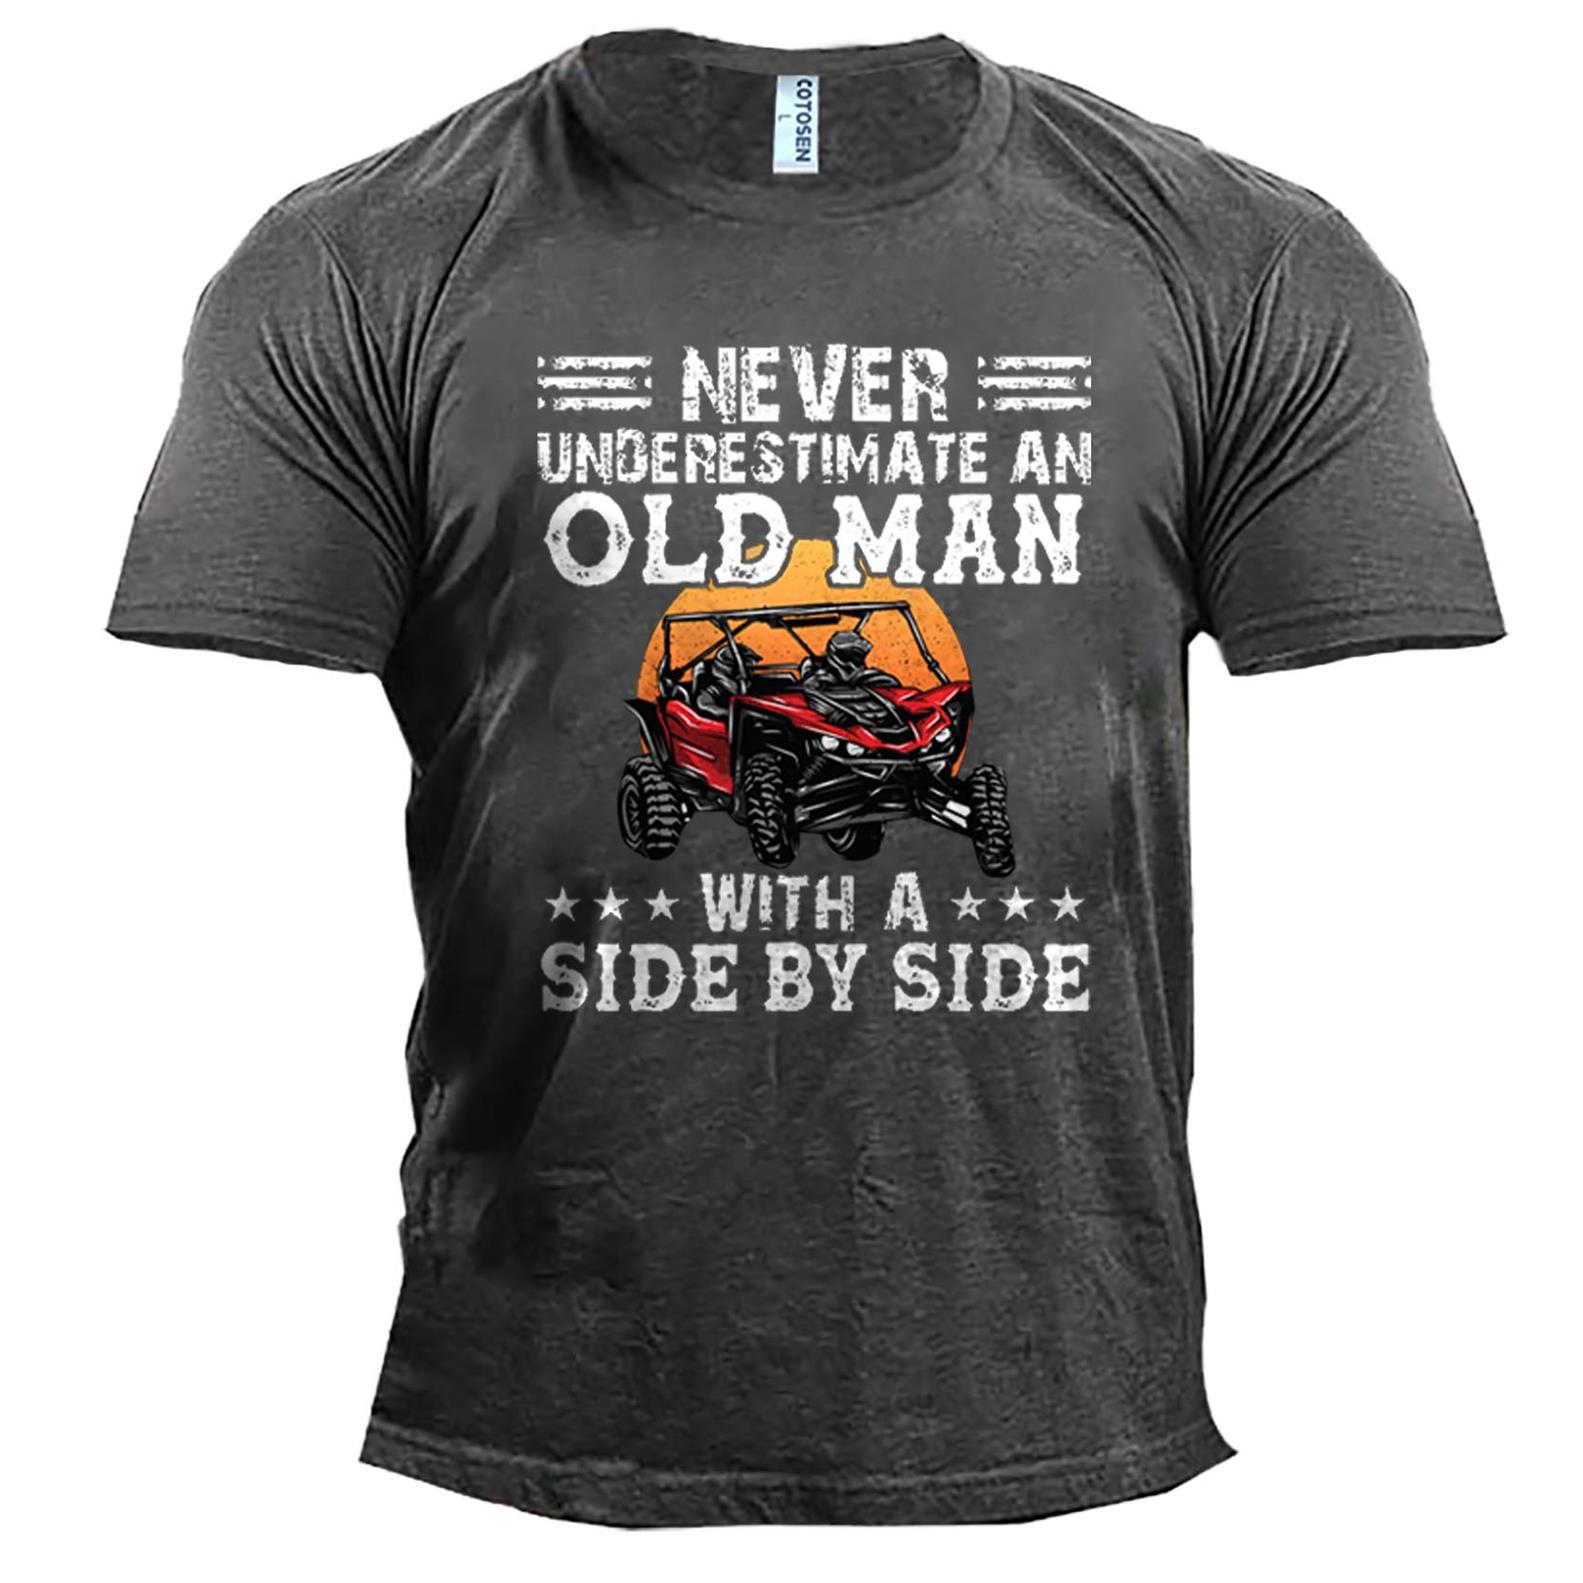 Men's Never Underestimate An Chic Old Man With A Side By Side Cotton T-shirt